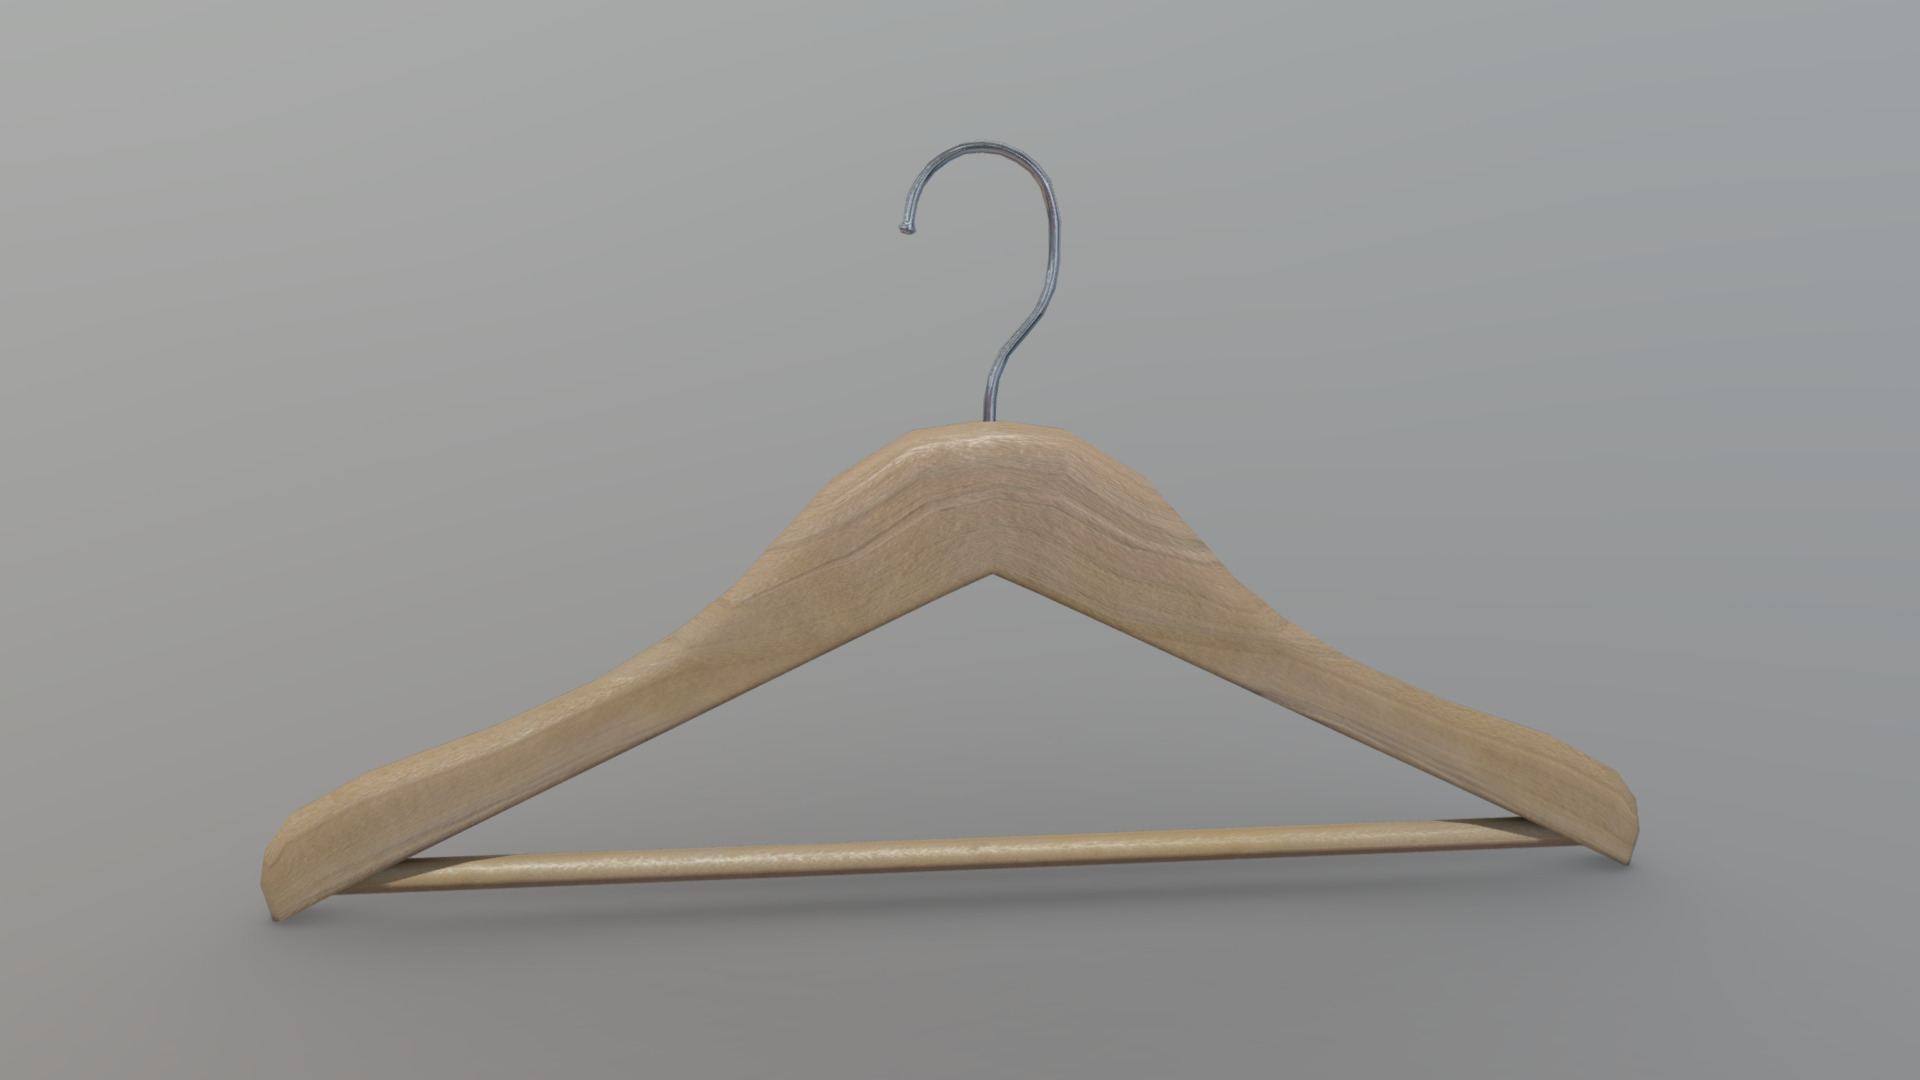 3D model Hanger - This is a 3D model of the Hanger. The 3D model is about a wooden spoon with a handle.